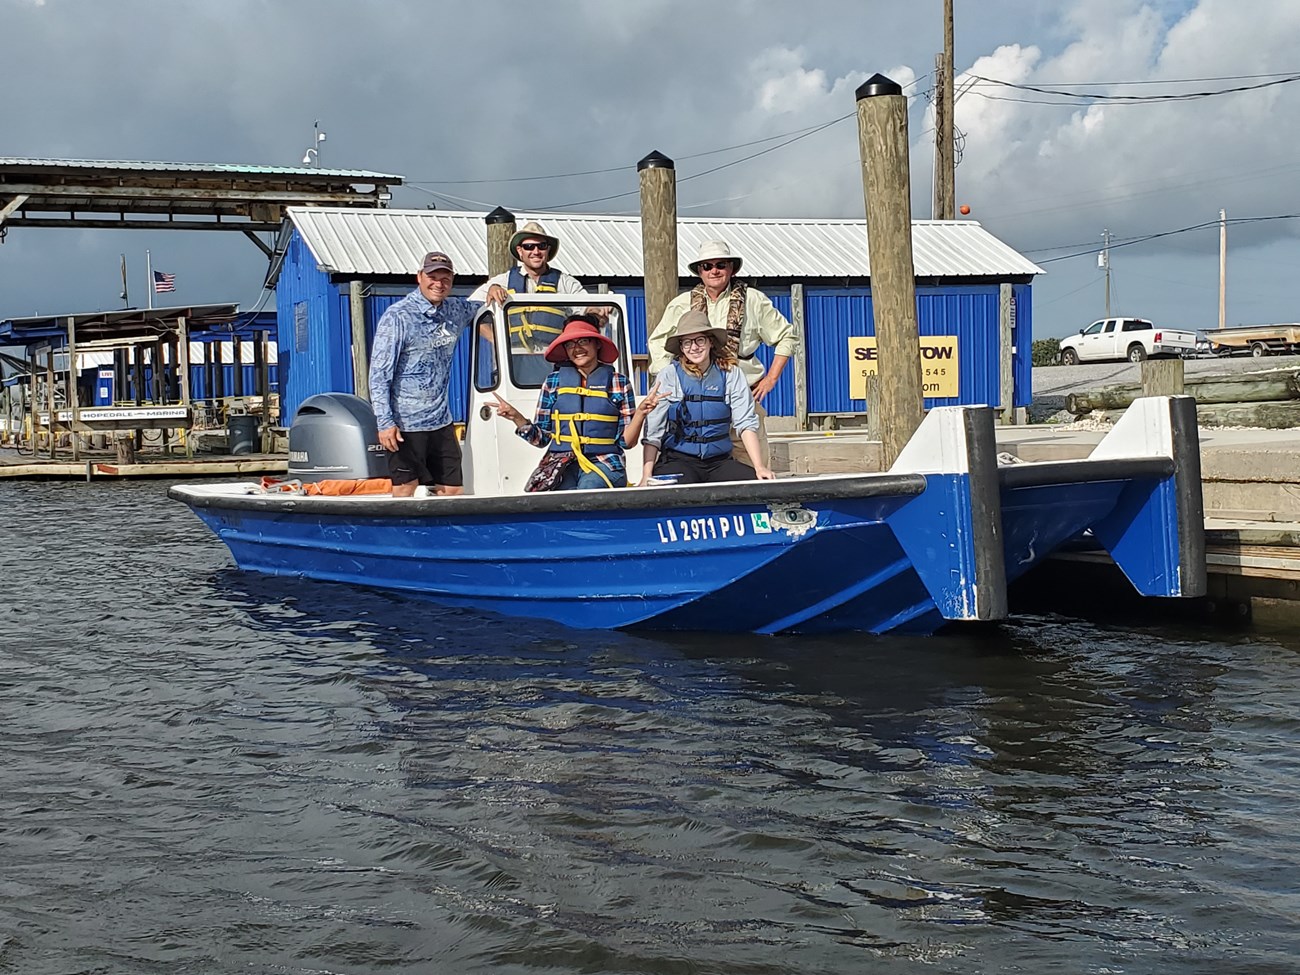 MRDAM Working Group members posing for a picture on a docked boat, preparing to conduct fieldwork.